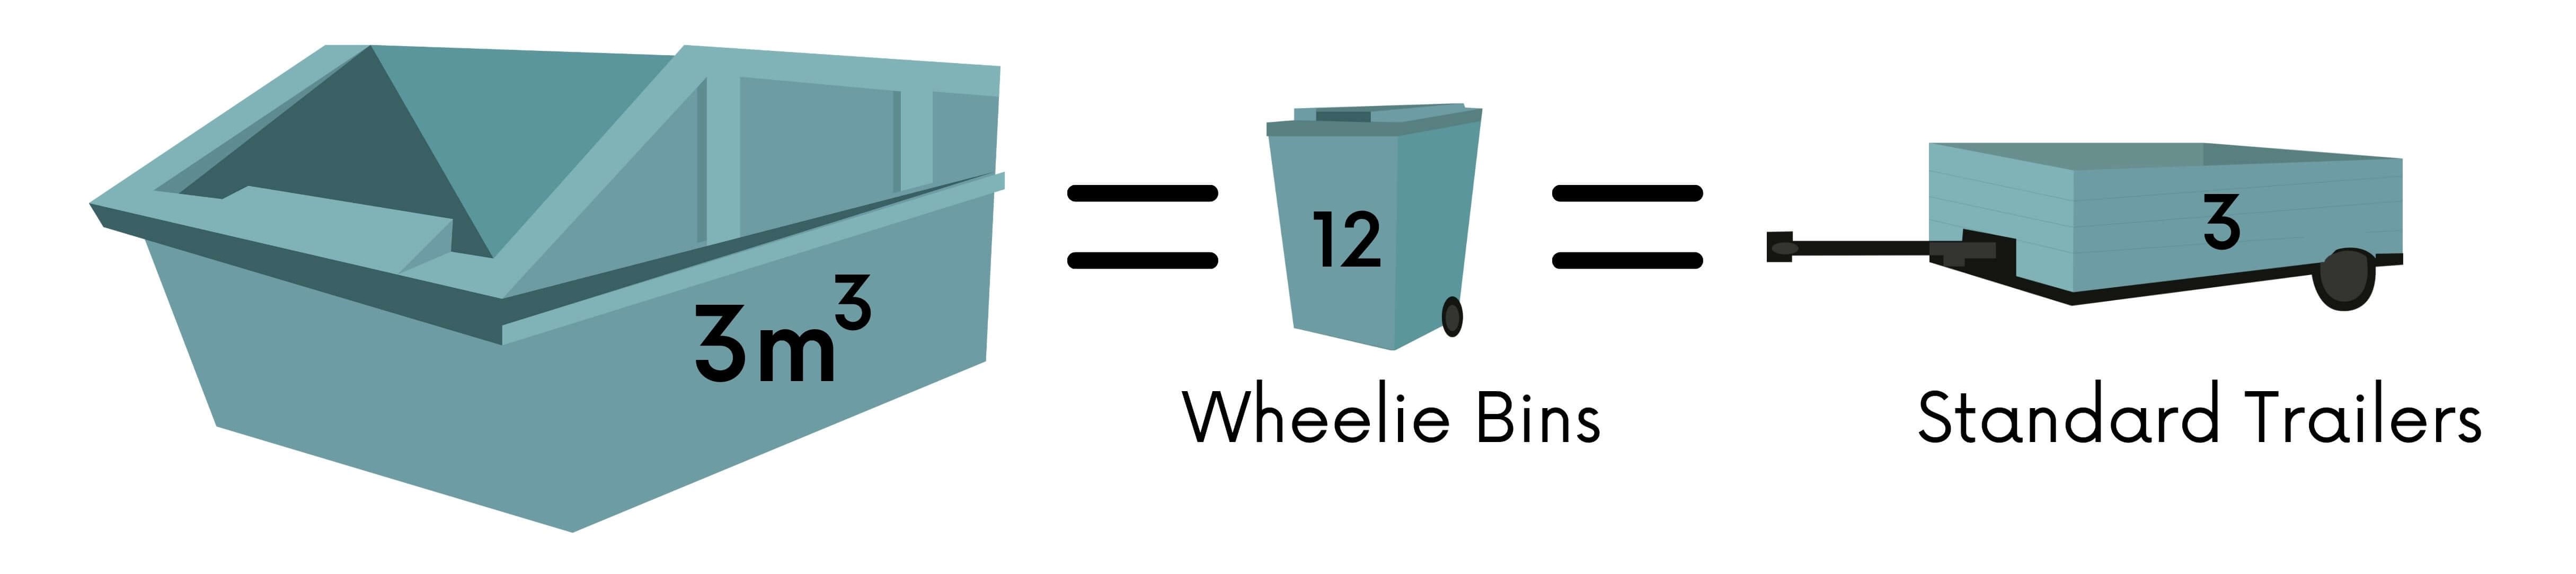 skip bin sizes and prices